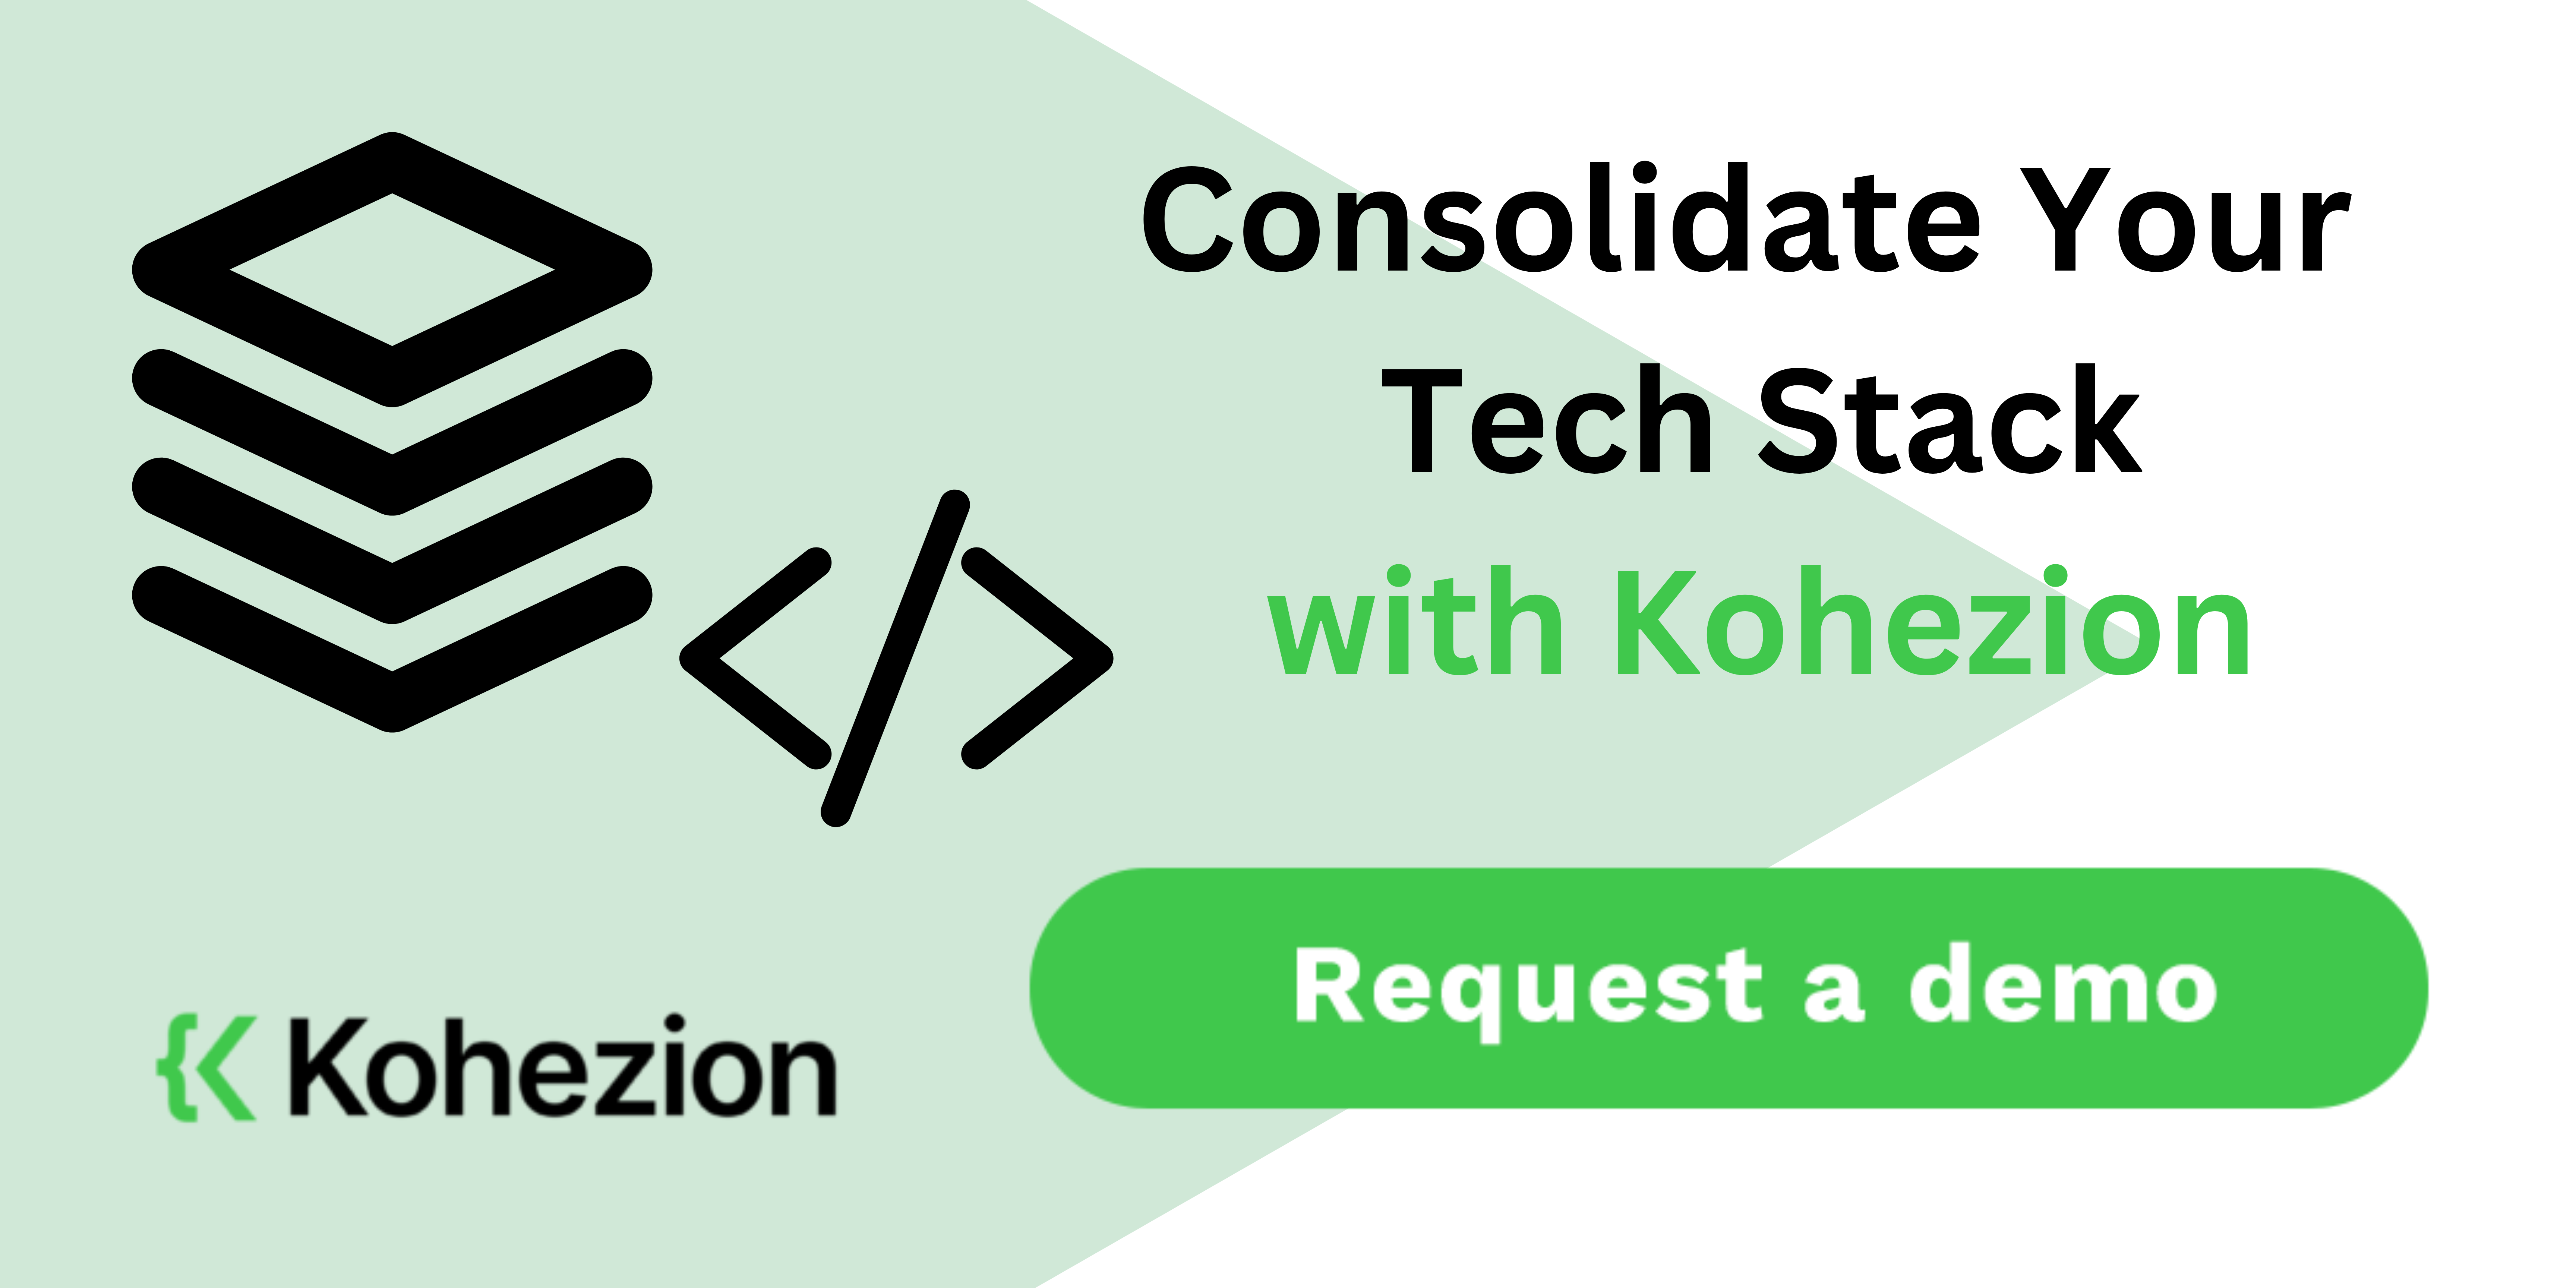 consolidate your tech stack with kohezion